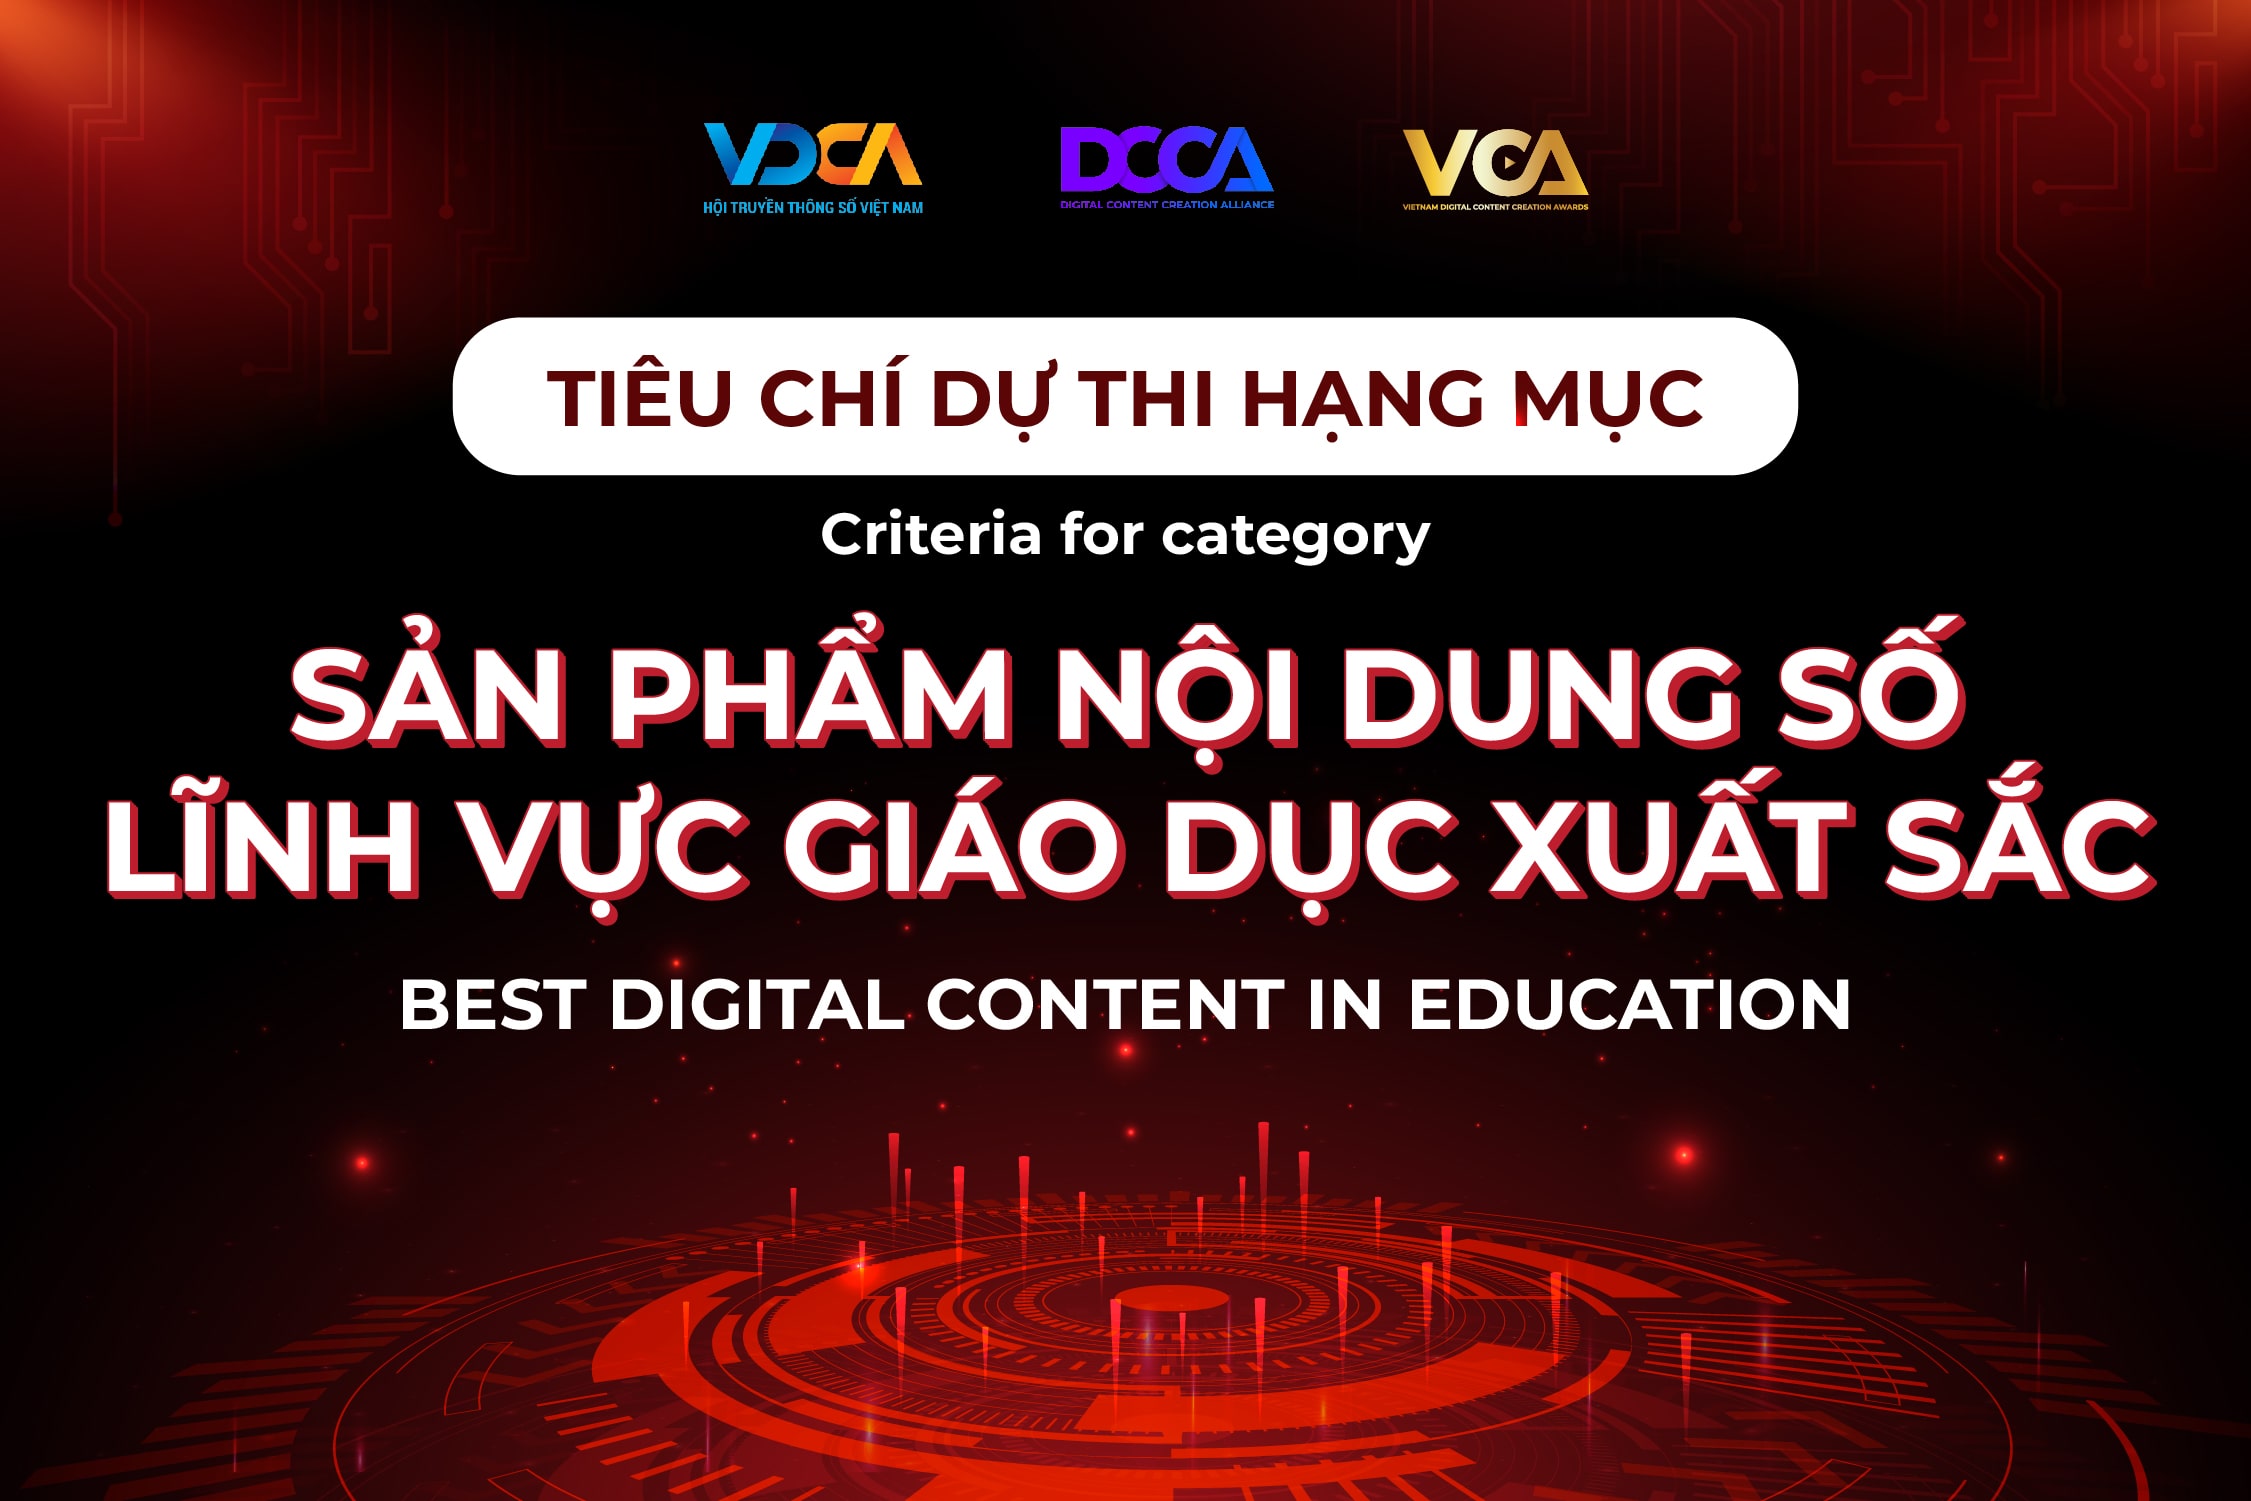 Criteria for the Best Digital Content in Education